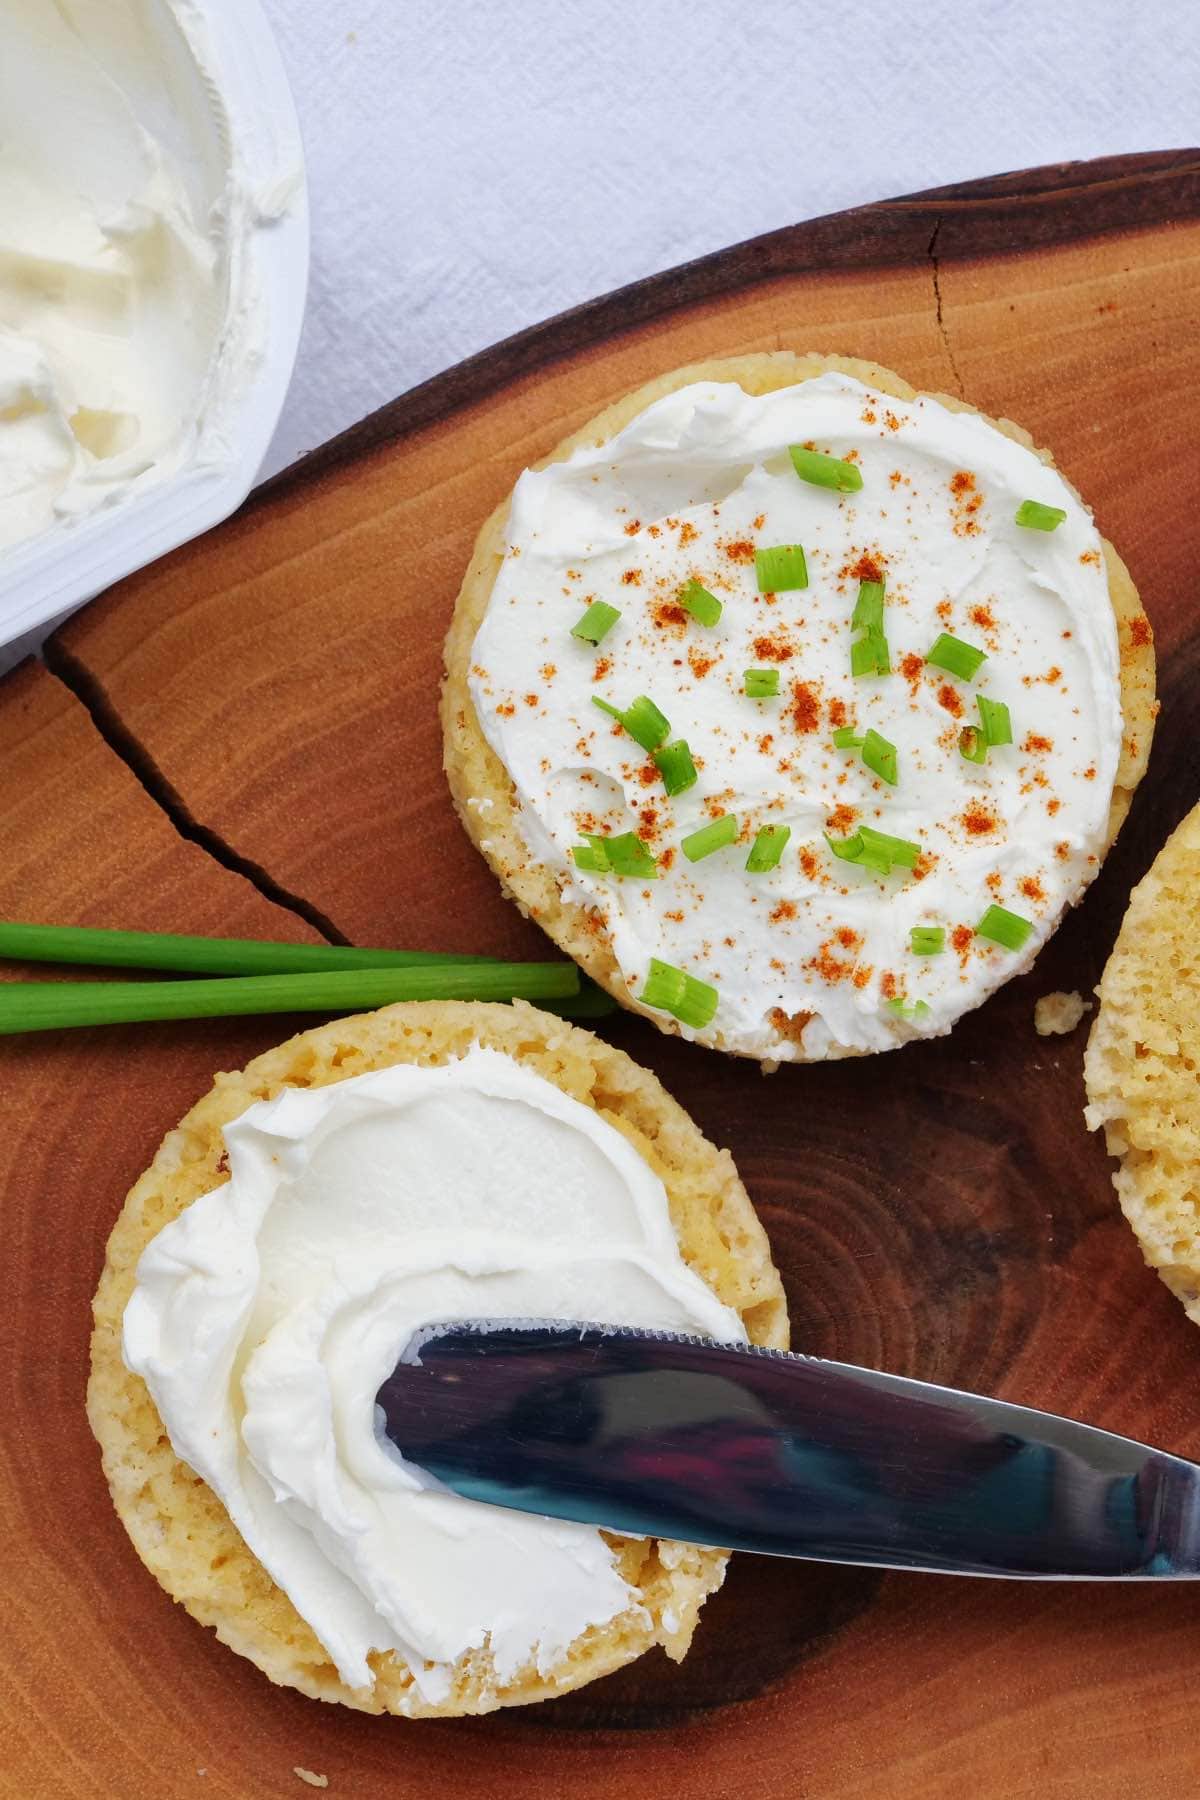 90 second keto bread with cream cheese and scallions.